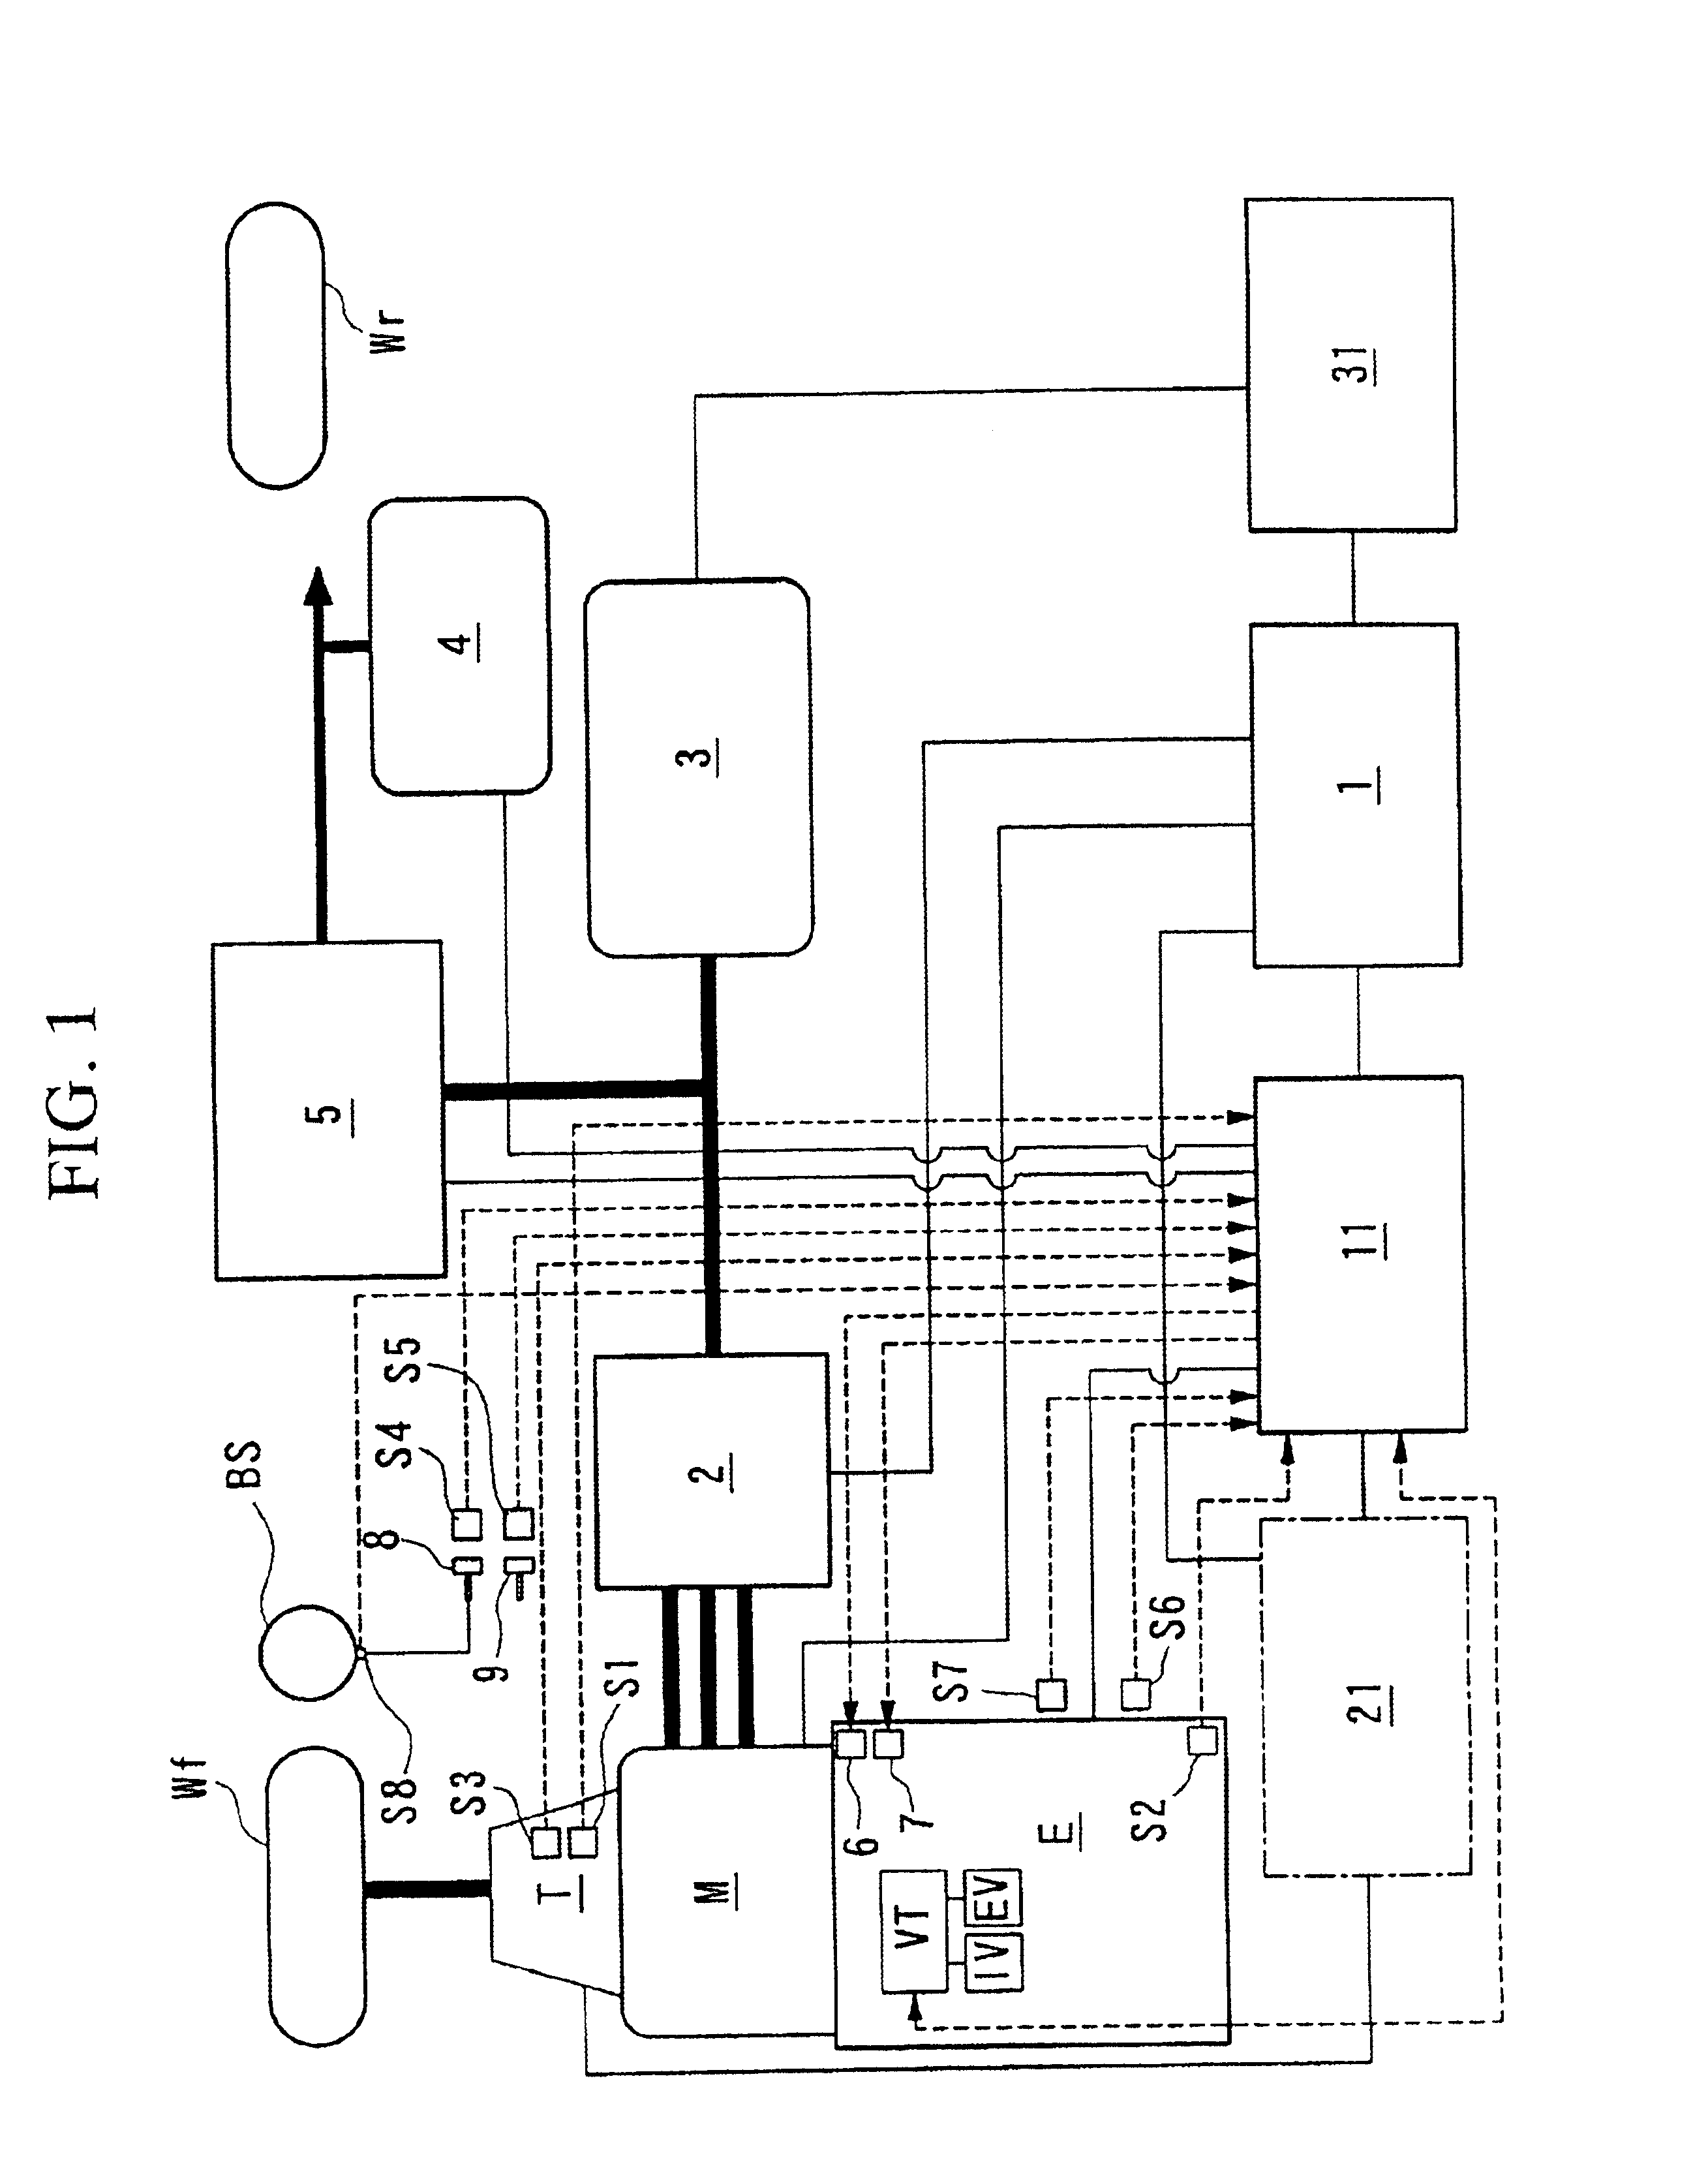 Control device for hybrid vehicles